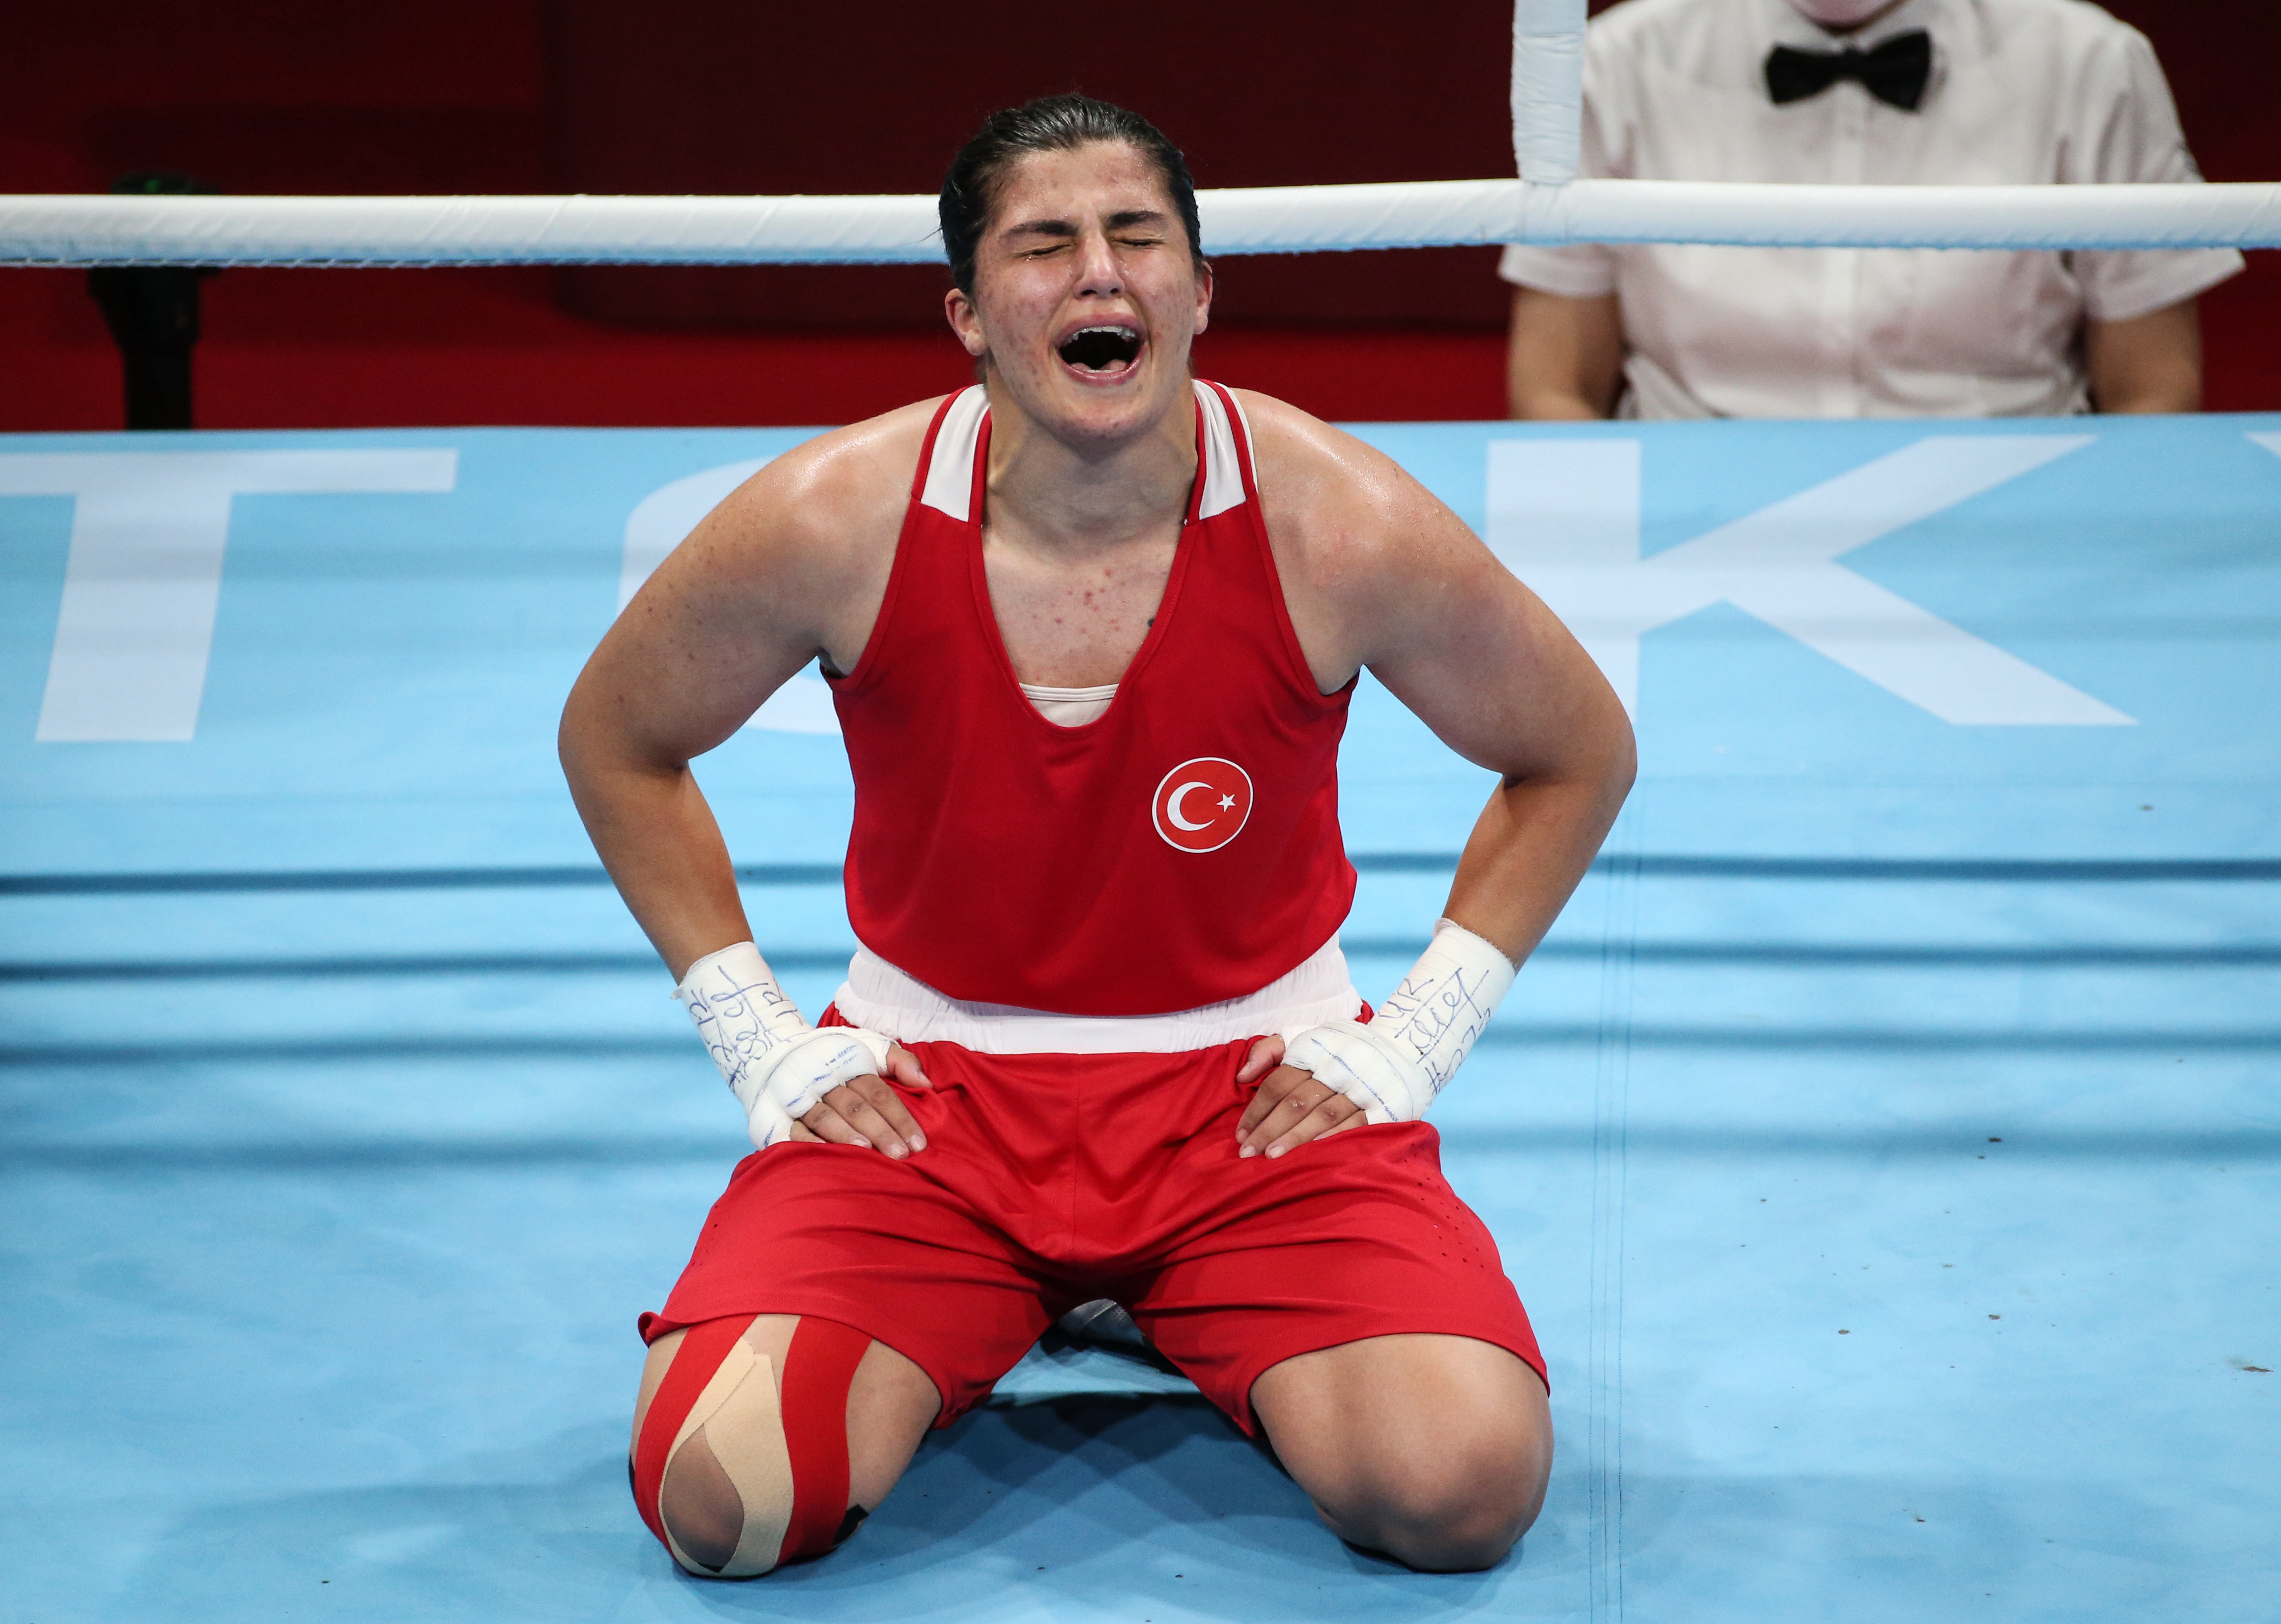 Busenaz Surmeneli of Turkey bags gold in women’s welterweight final at Tokyo Olympics